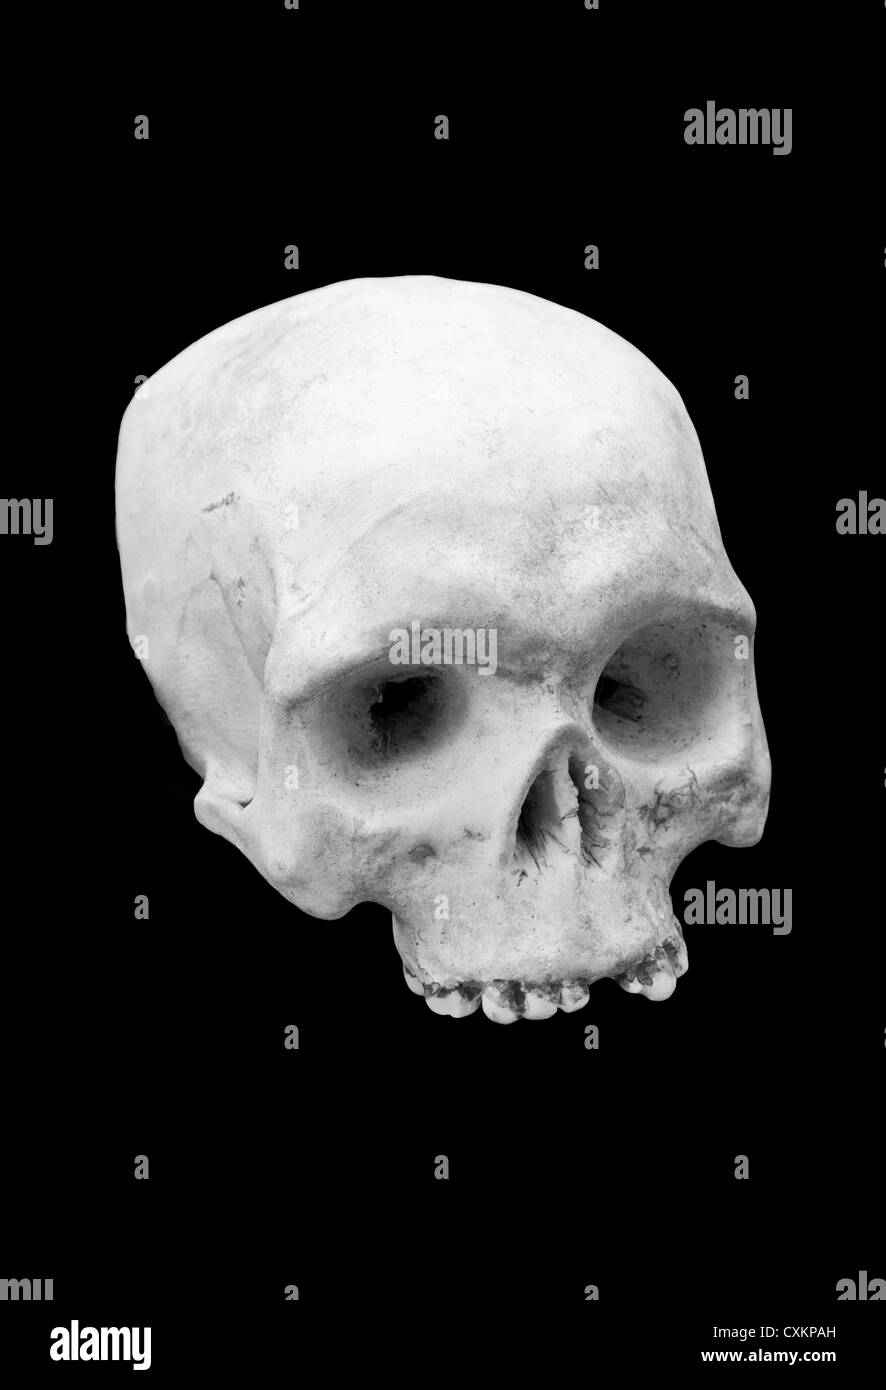 Skull on a black background. No lower jaw. Stock Photo